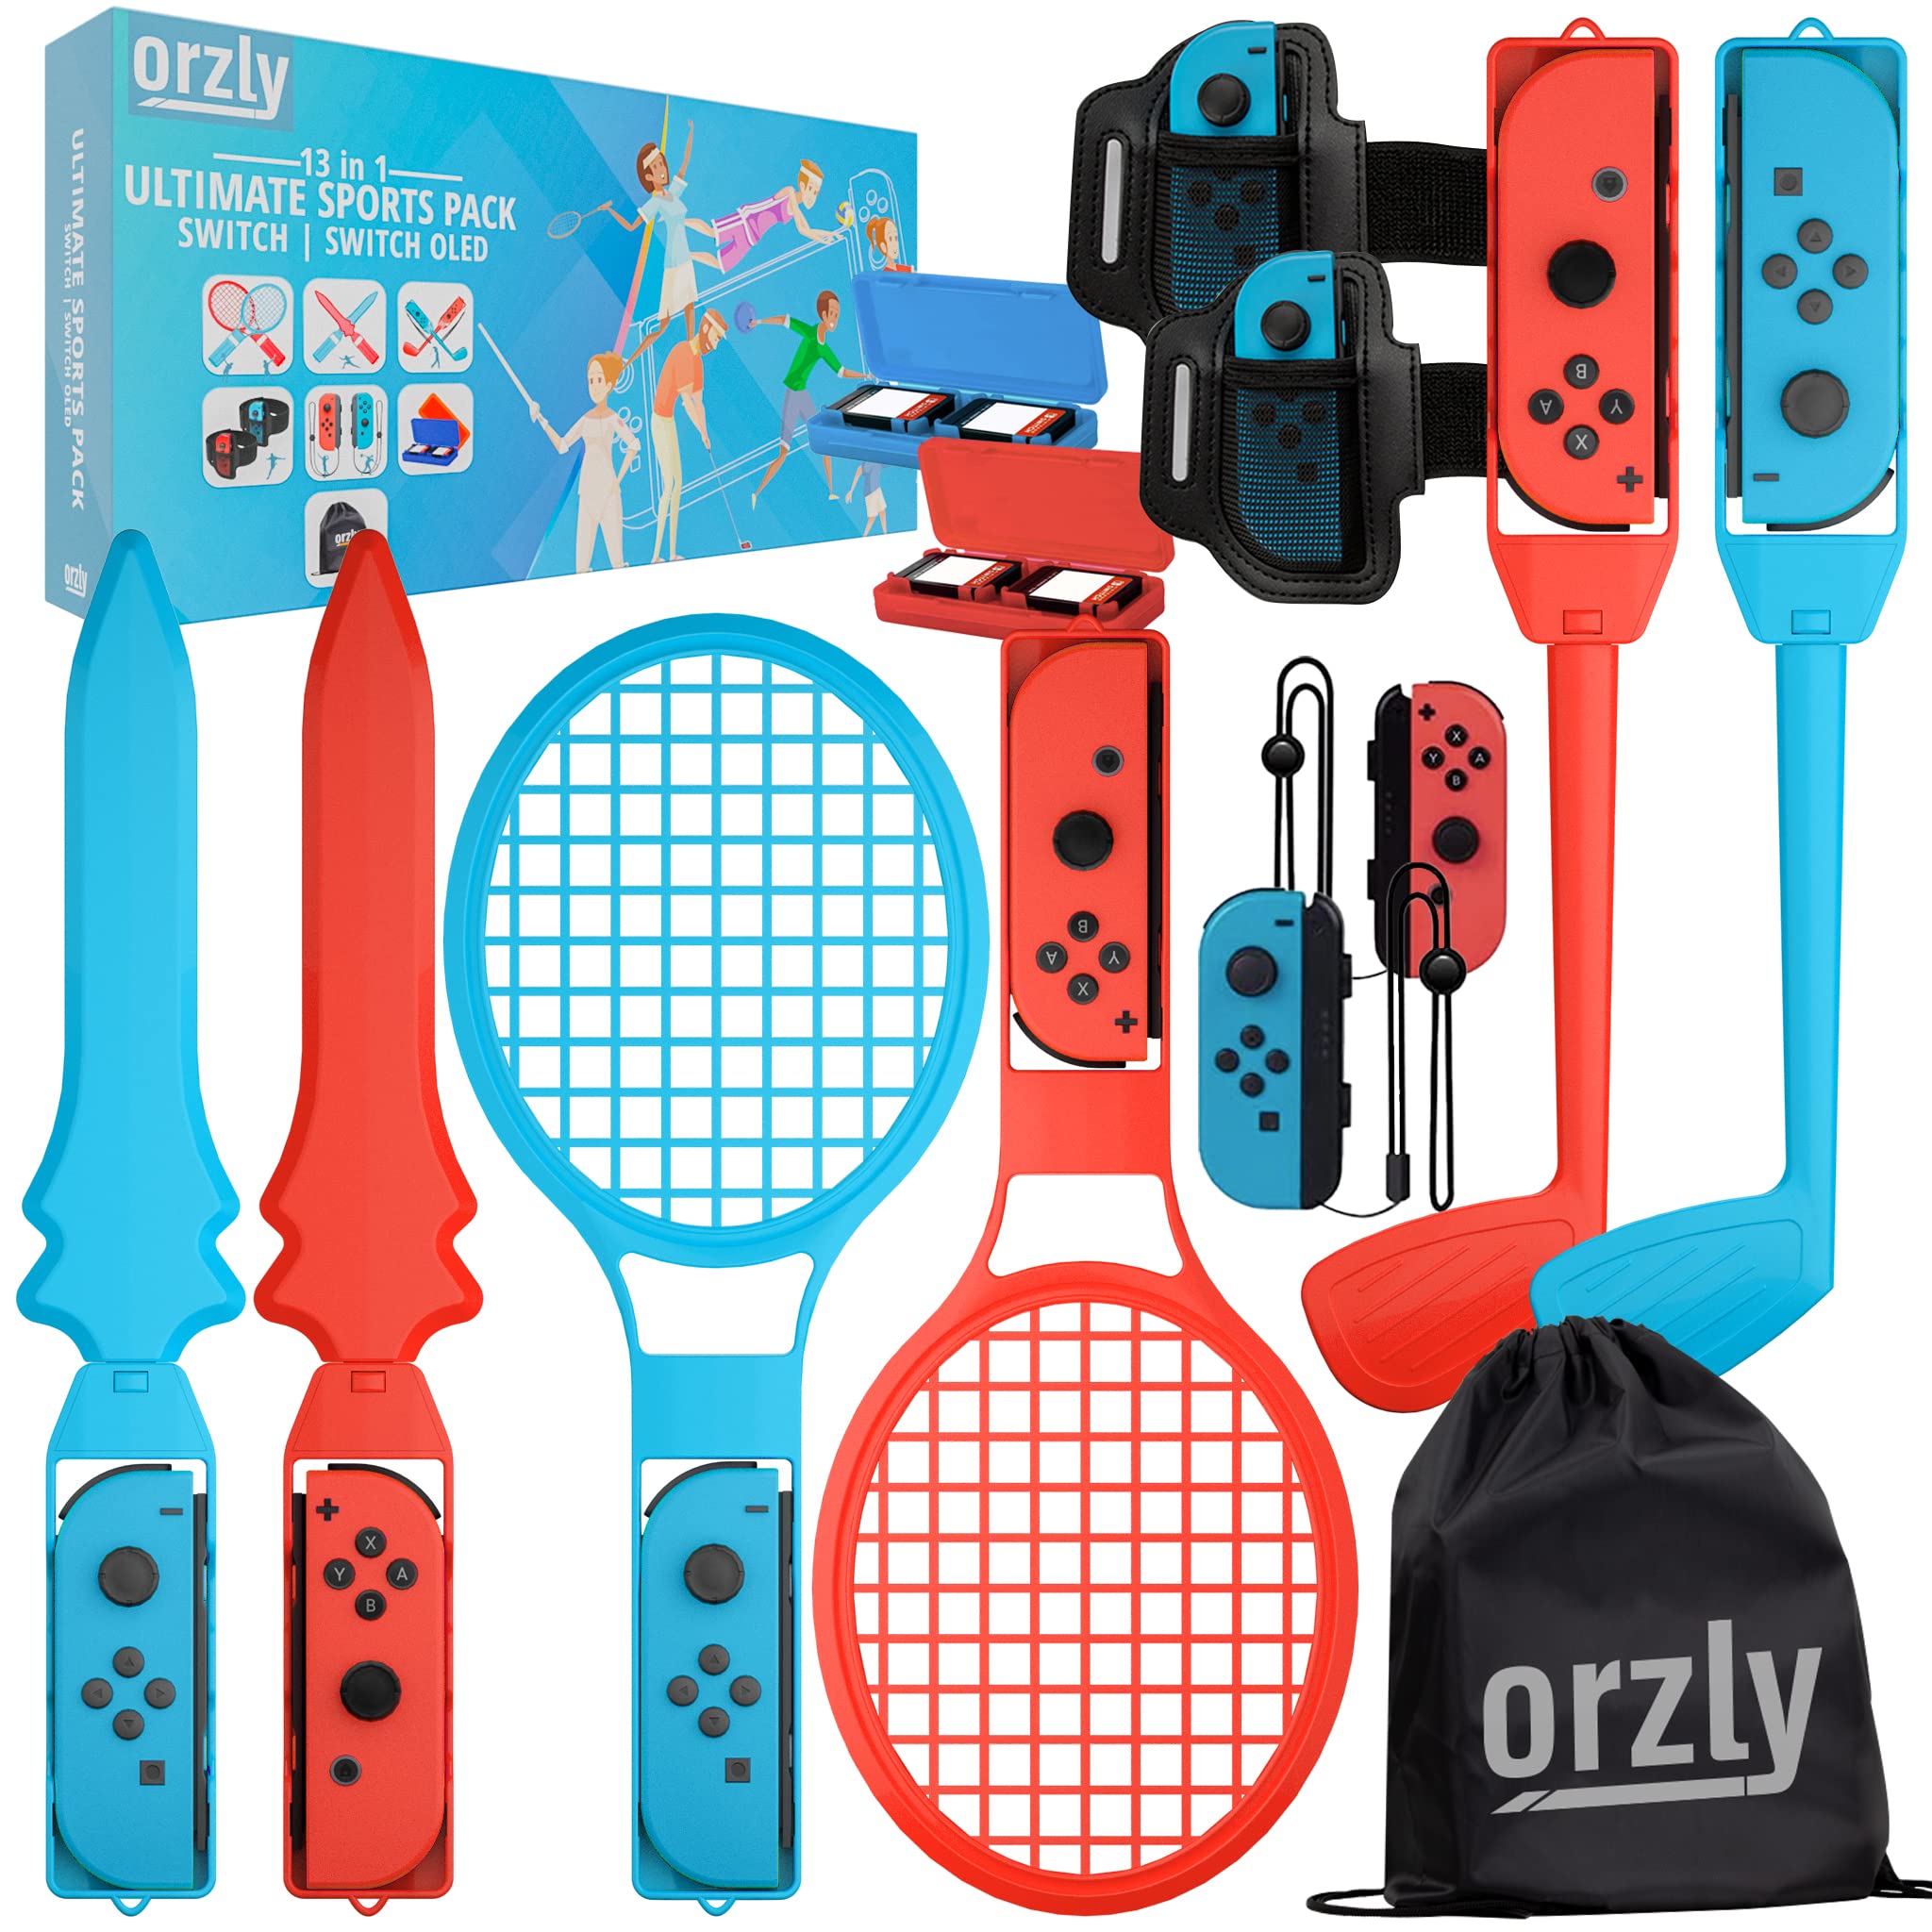 Orzly Switch Sports Games 2022 Accessories Bundle Pack for Nintendo Switch & Switch OLED with Tennis Rackets, Golf Clubs, Chambara Swords, Soccer Leg Straps & Joycon Grips - With Carry Bag